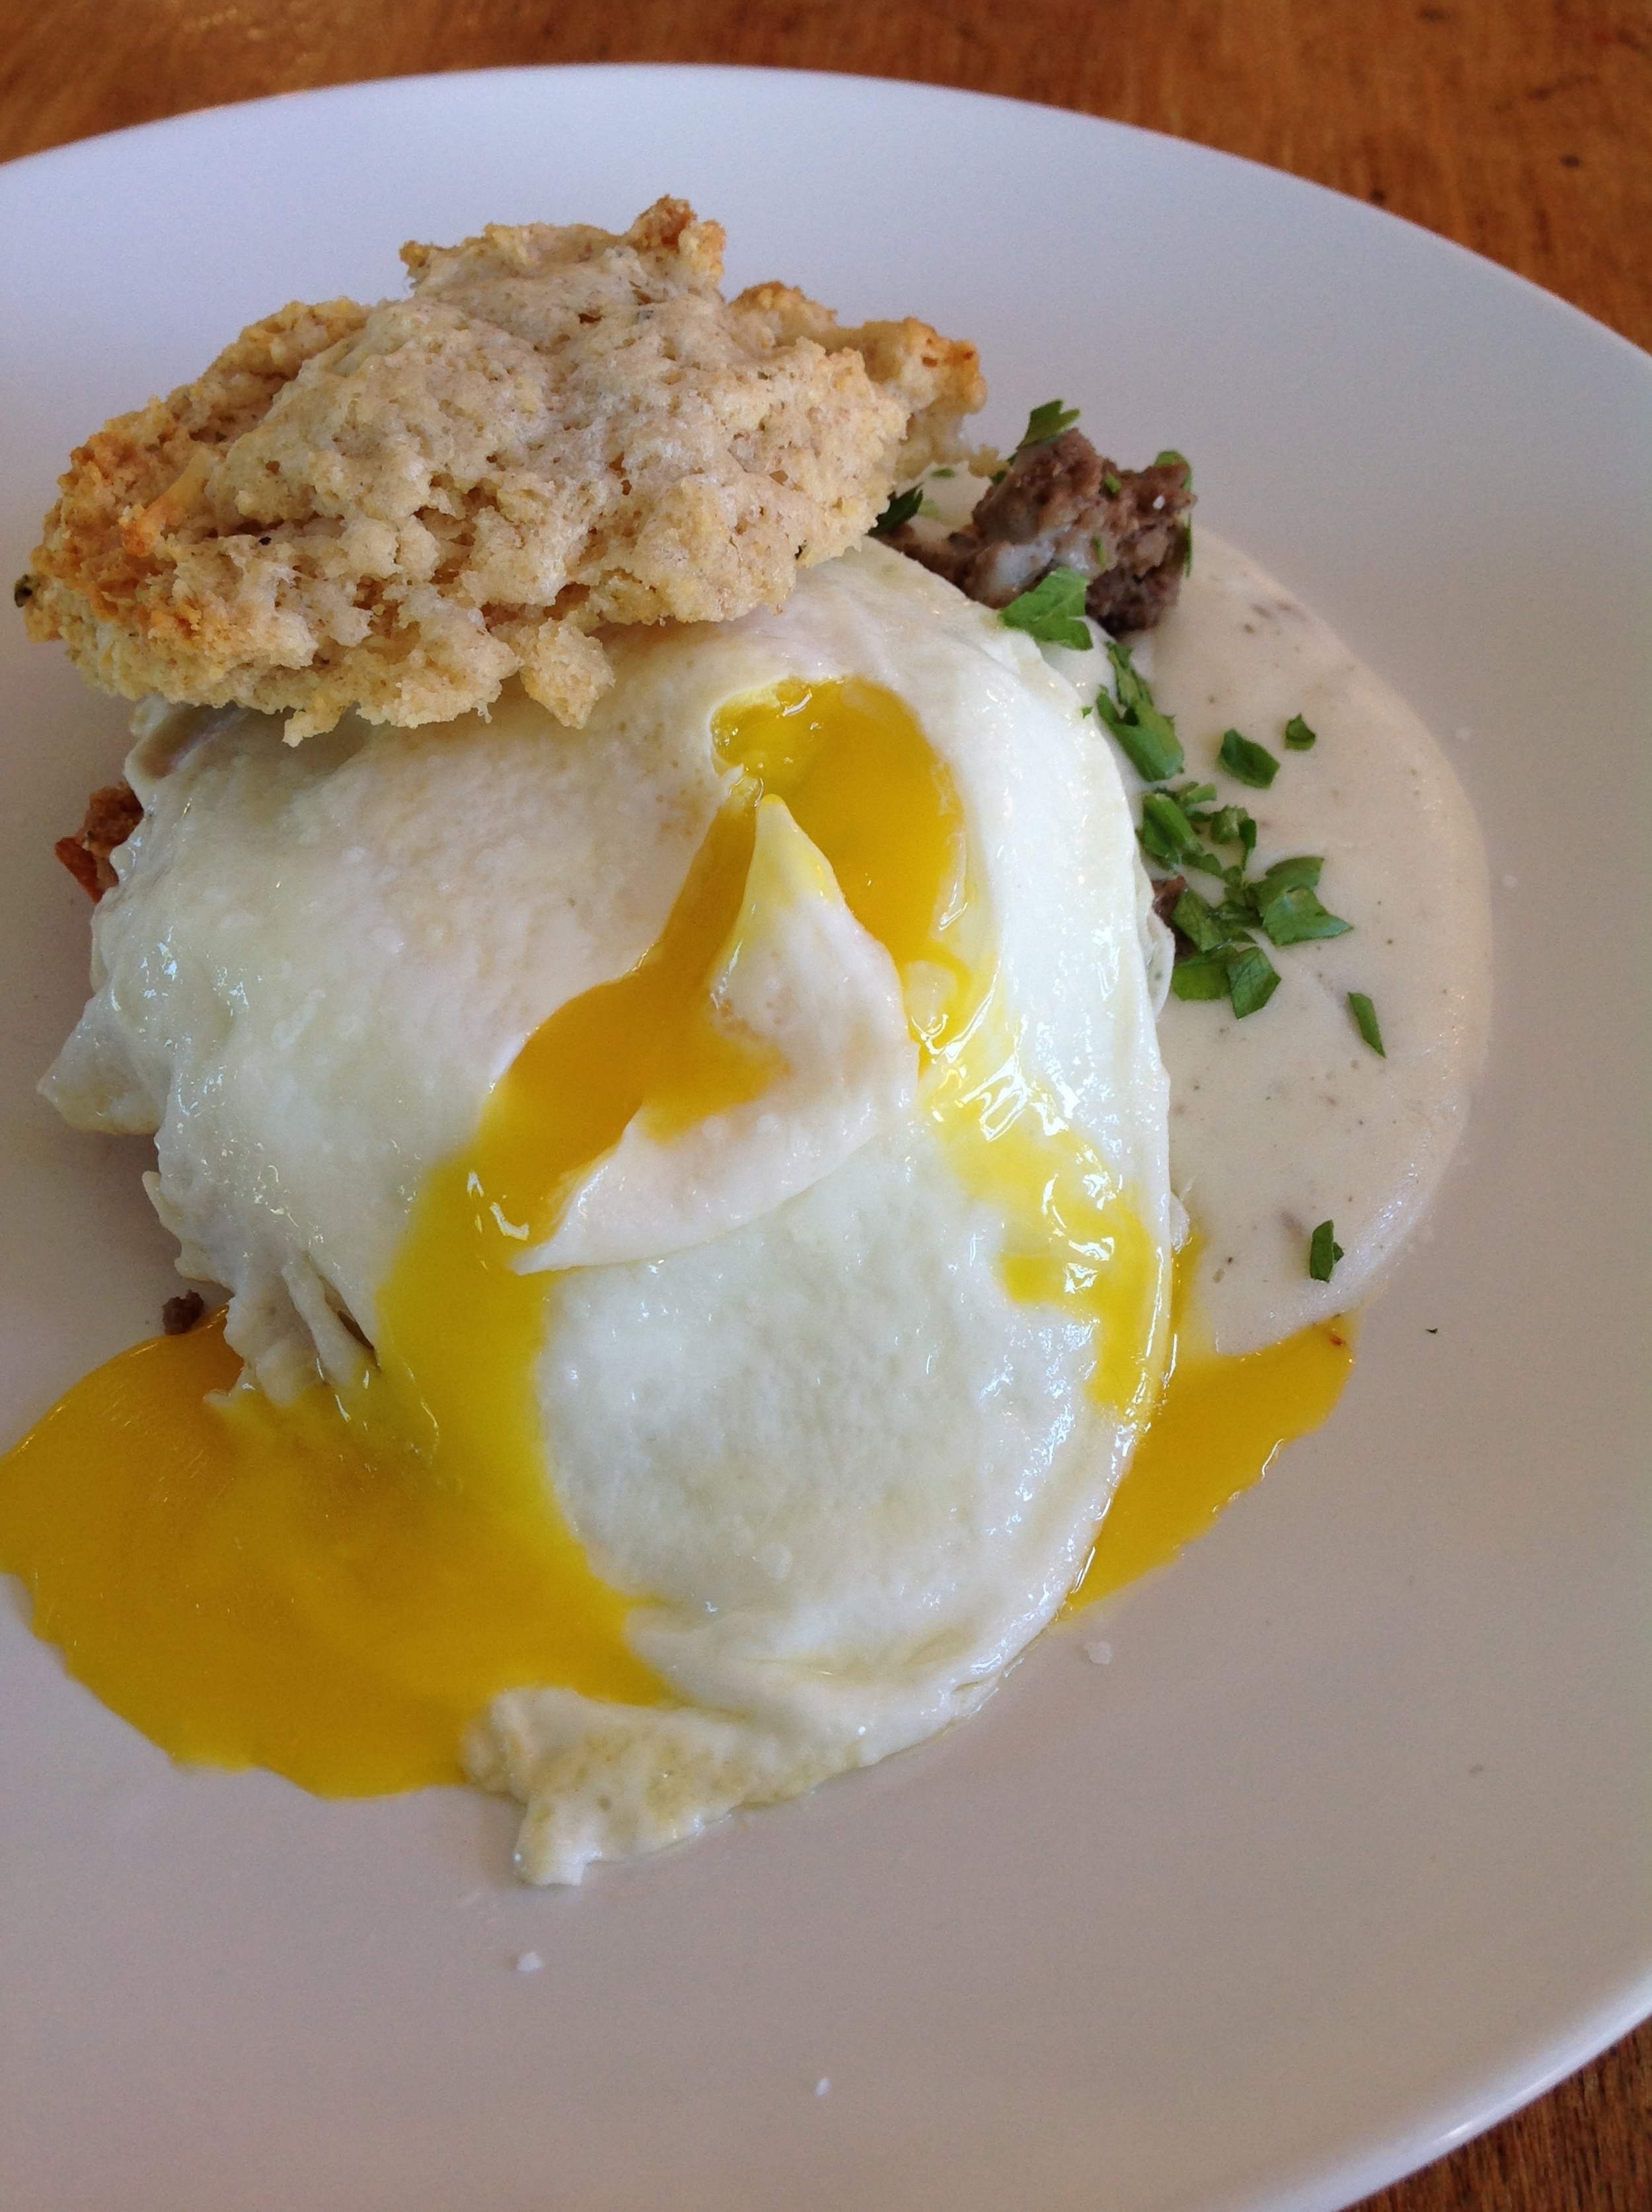 Scones and Gravy with a runny egg